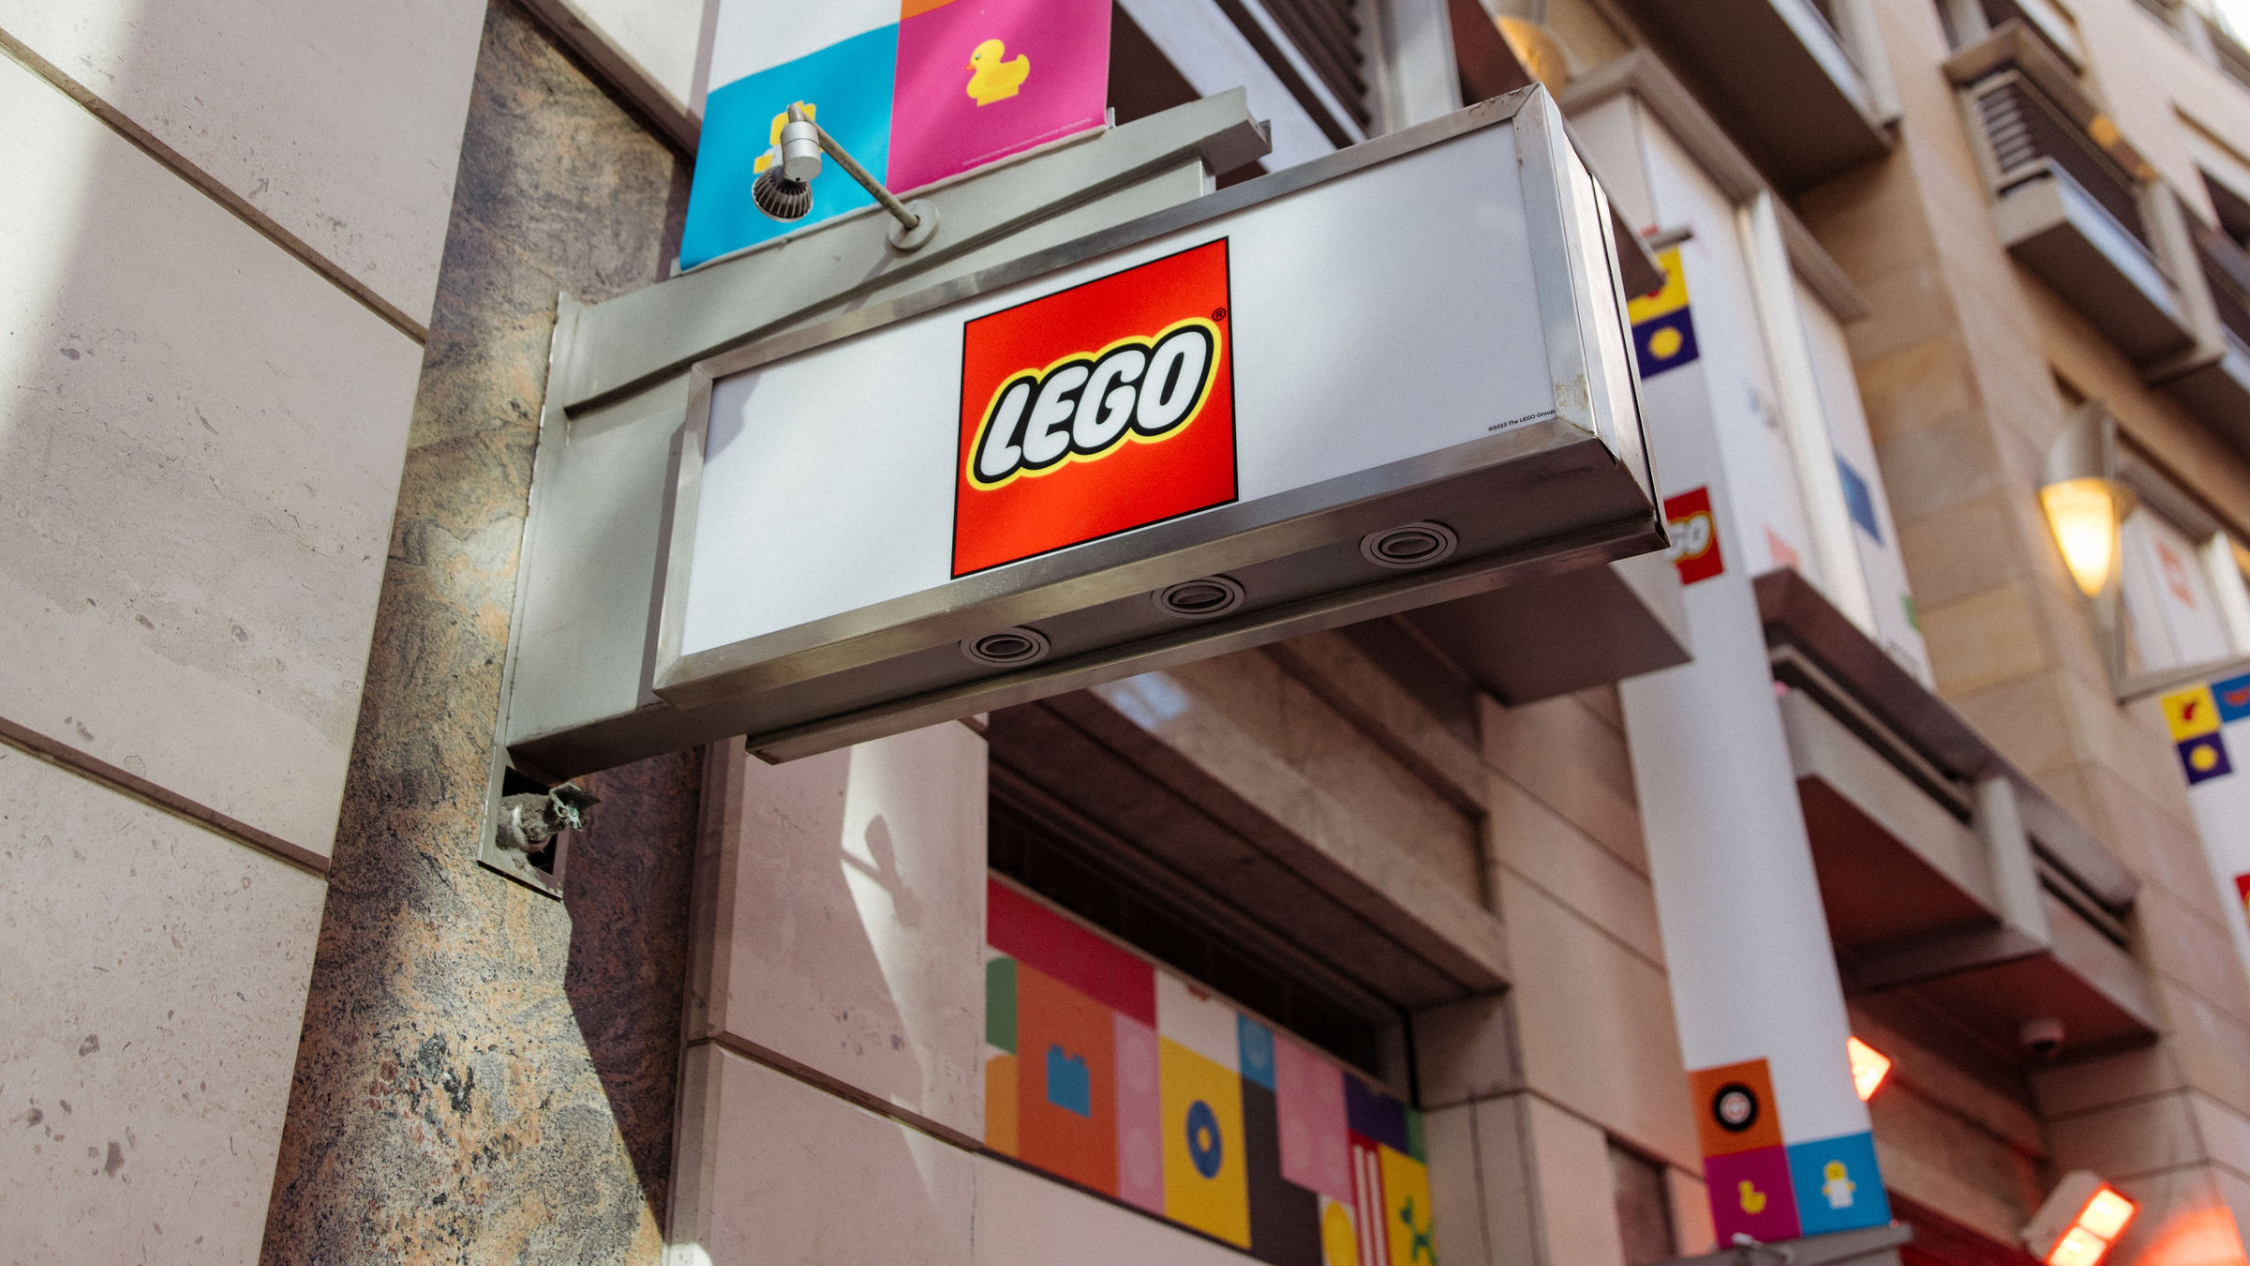 Australia's Tallest Lego Creation Launched at Brickvention